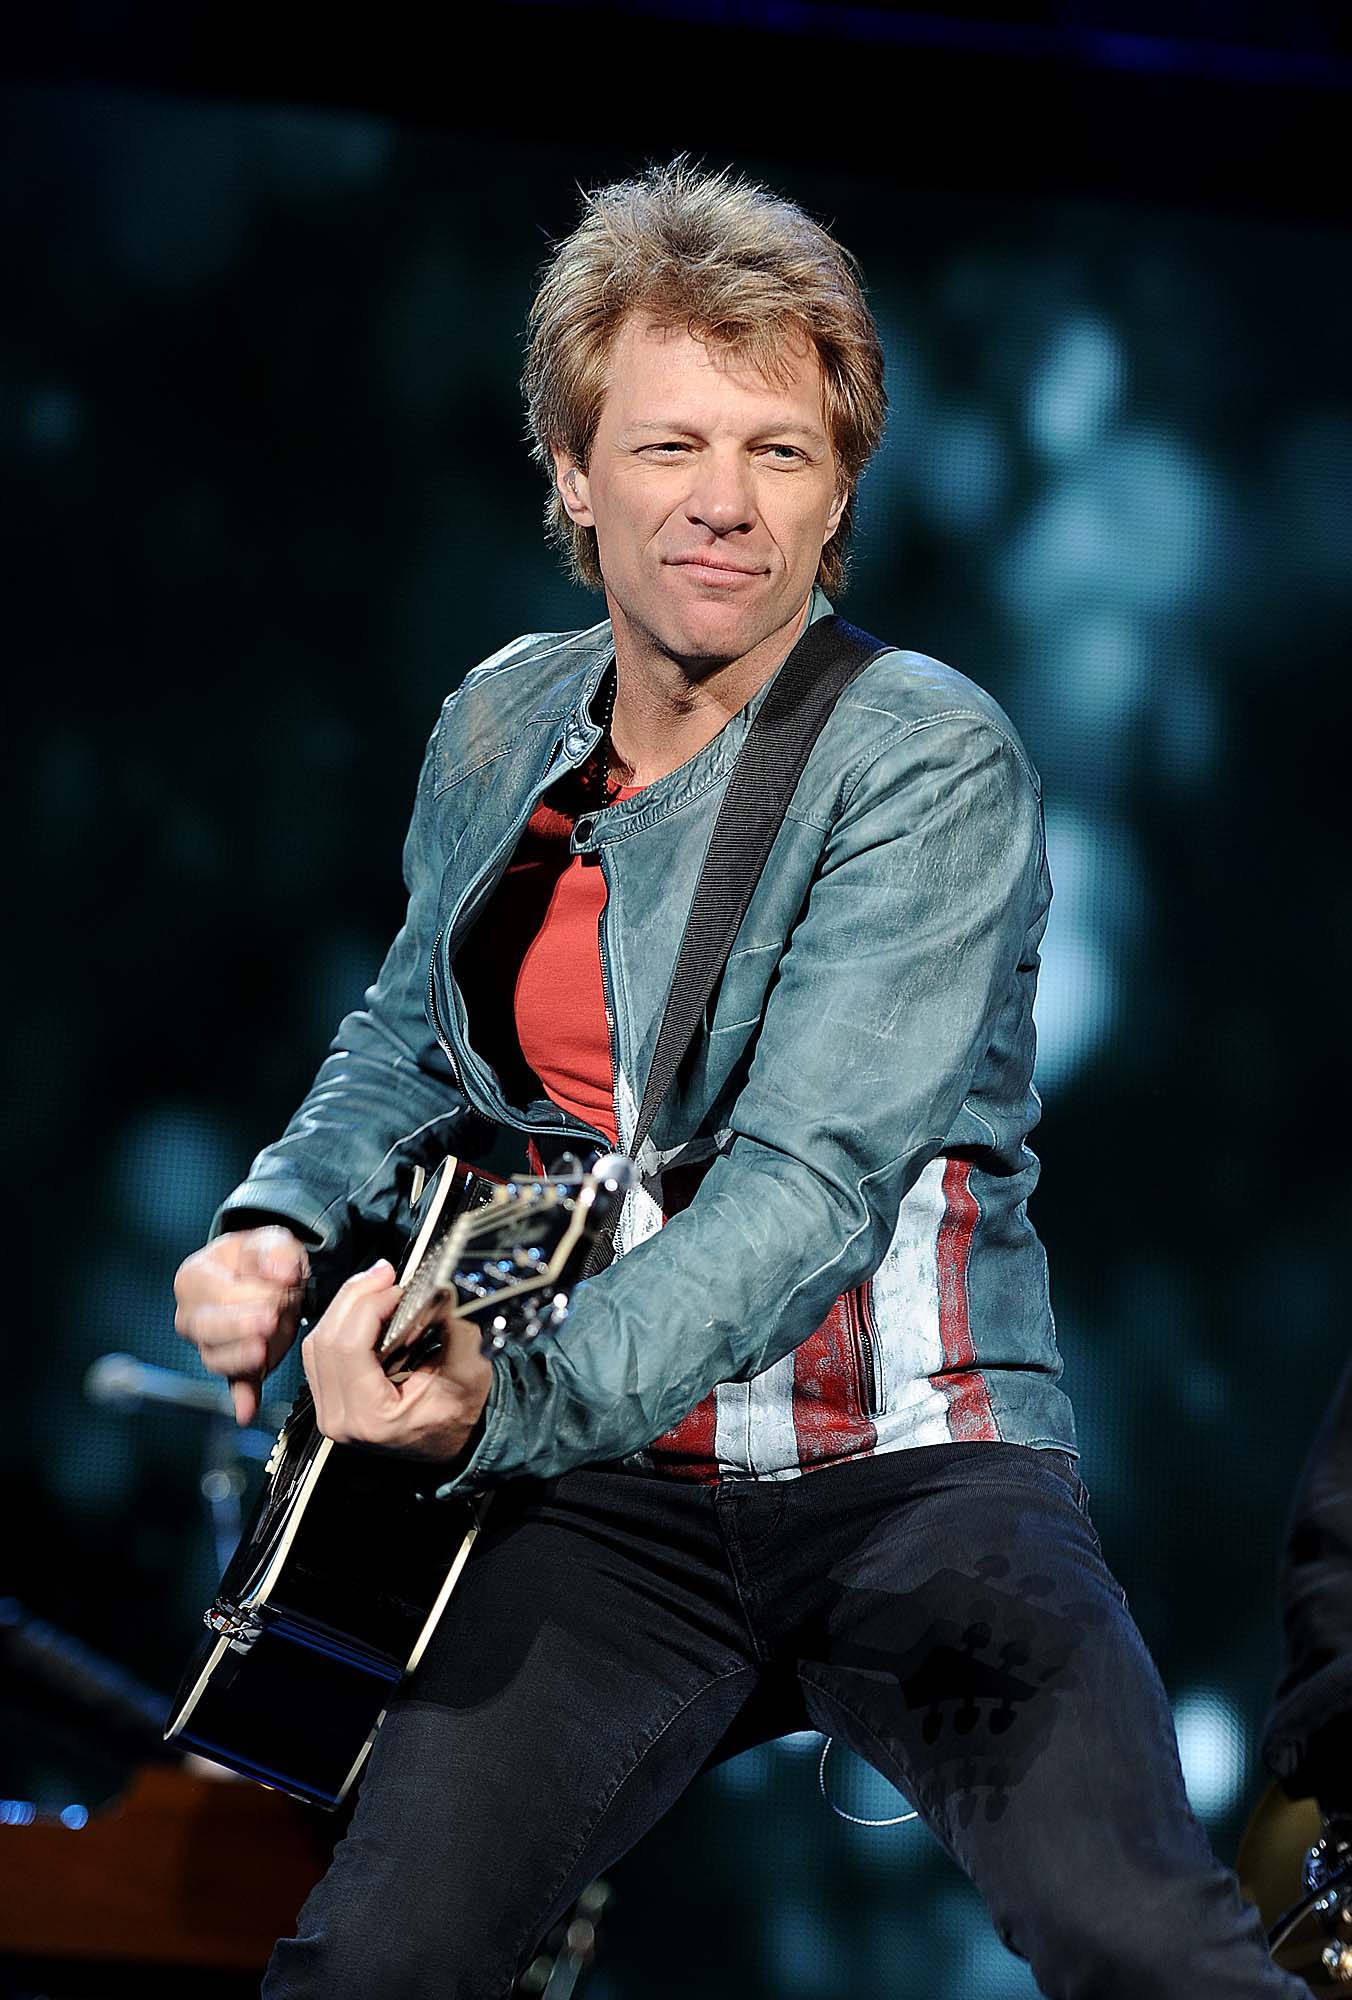 Jon Bon Jovi is one of the stars who has signed the letter